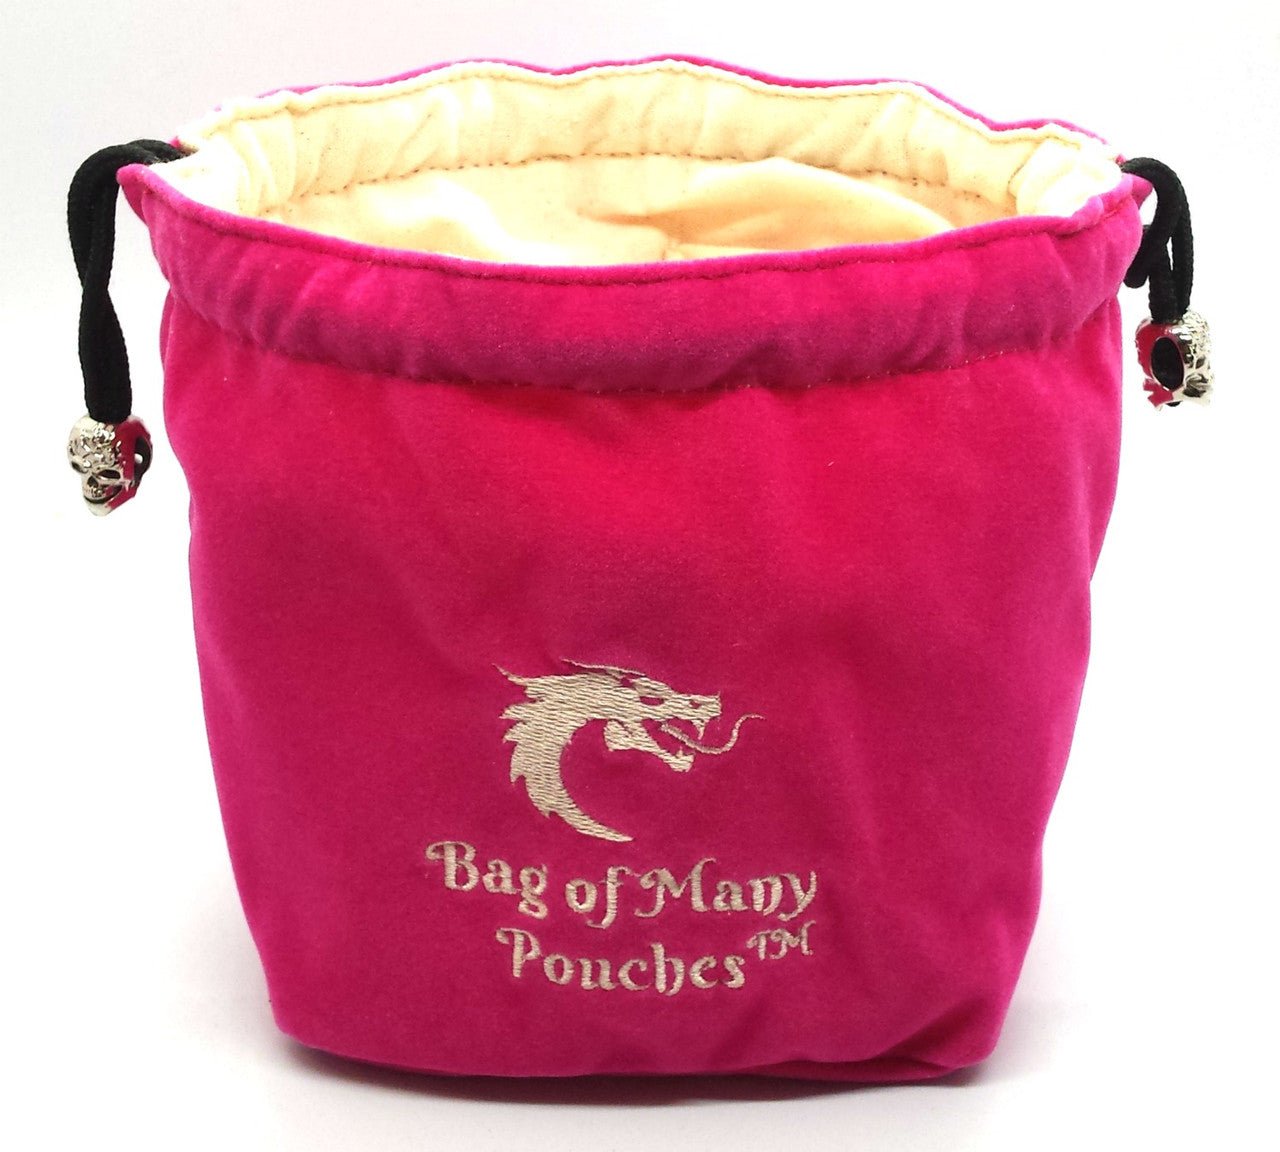 Old School Dice: Bag of Many Pouches - Pink - Gamescape